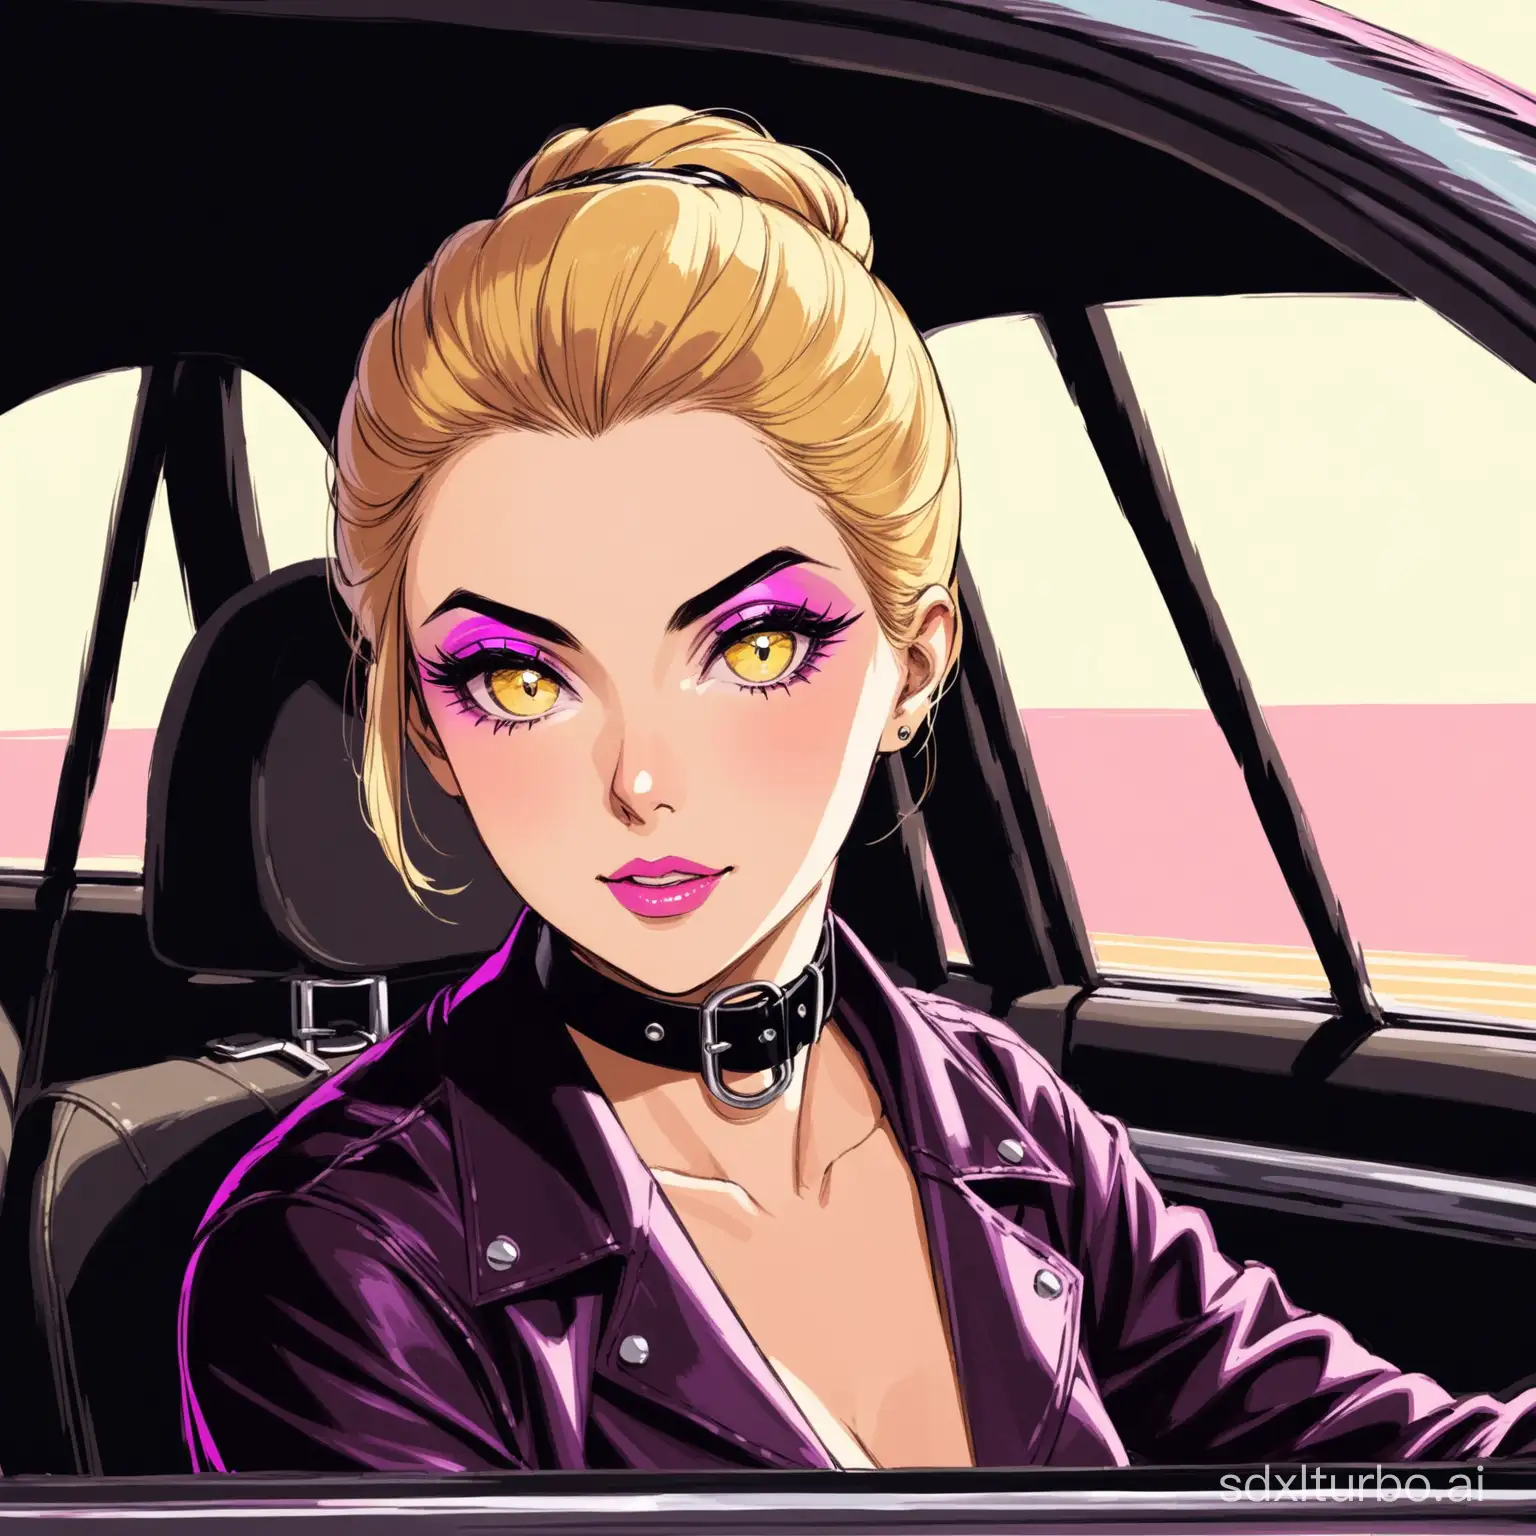 Sitting in car , collar de leather and metal buckle , 50s mature young woman, with yellow hair, pink eye makeup and a black choker necklace \n Blonde e brown hair tied in a bun. Her eyes have dark eyeliner and purple eyeshadow.. ,